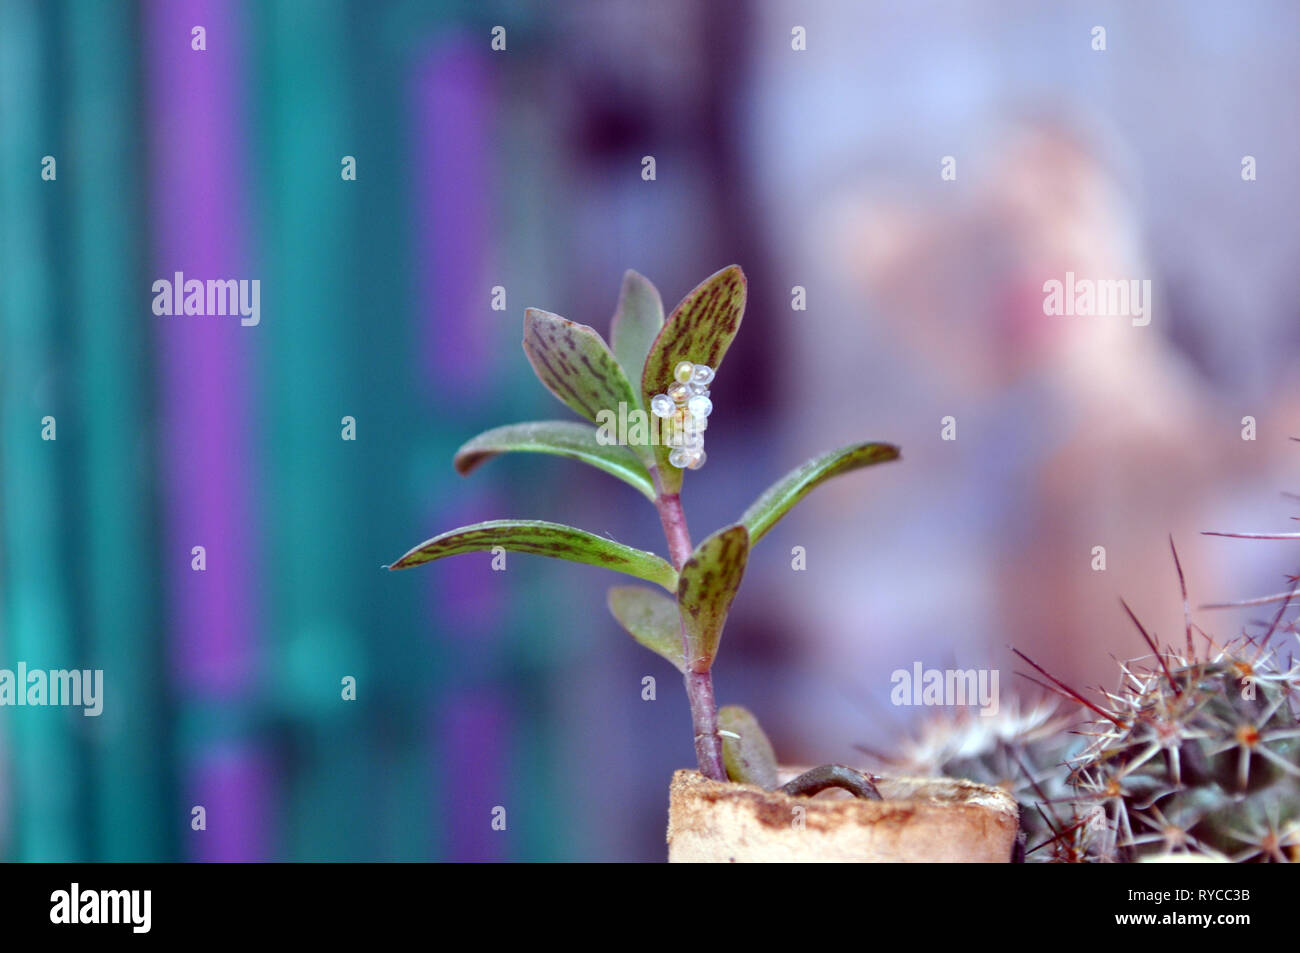 Cimex lectularius eggs on a kalanchoe plant with an violet and green stripes background Stock Photo